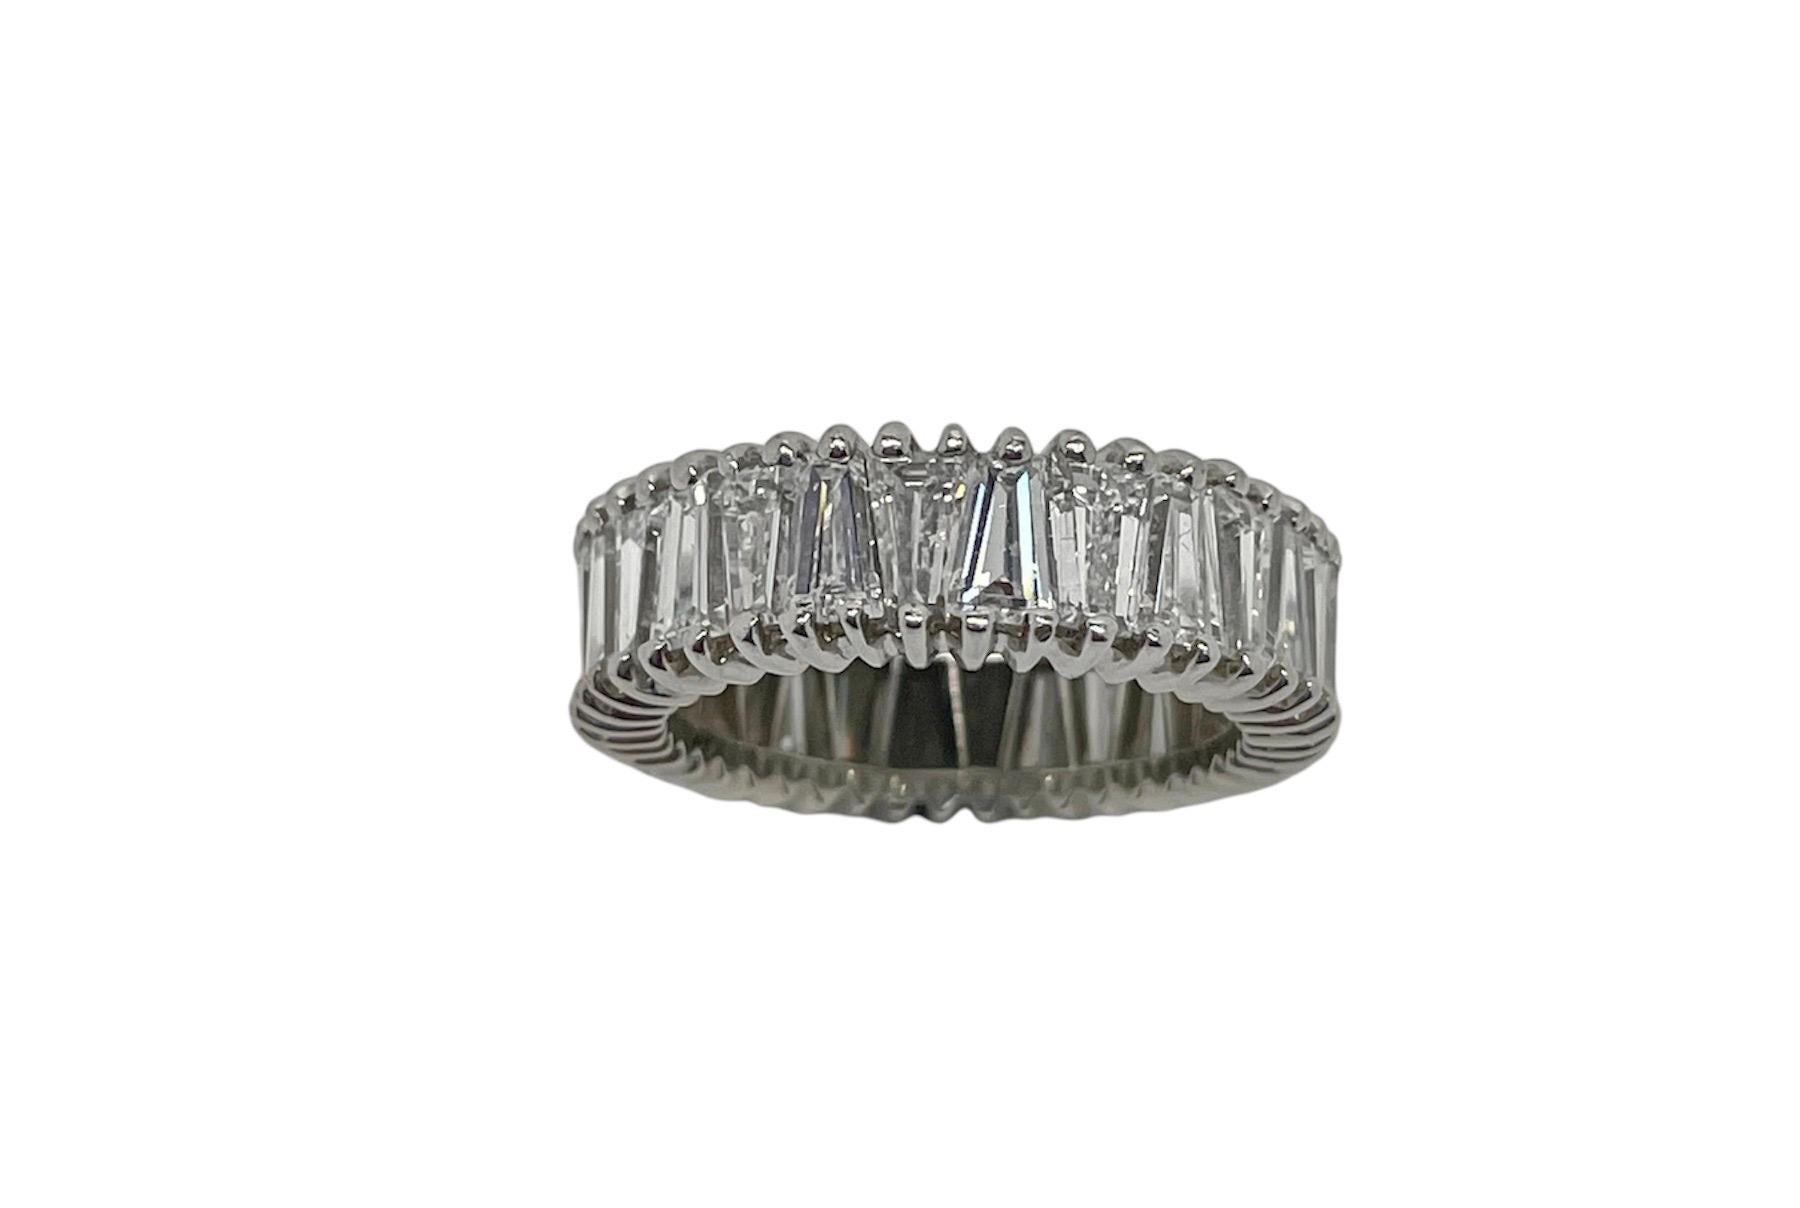 This unique eternity bands is beautifully made with 28 top quality tapered baguette cut diamonds weighing approximately 7.00 carats total. Mounted in platinum, this ring is different than your everyday round brilliant cut eternity band!

Ring size 6